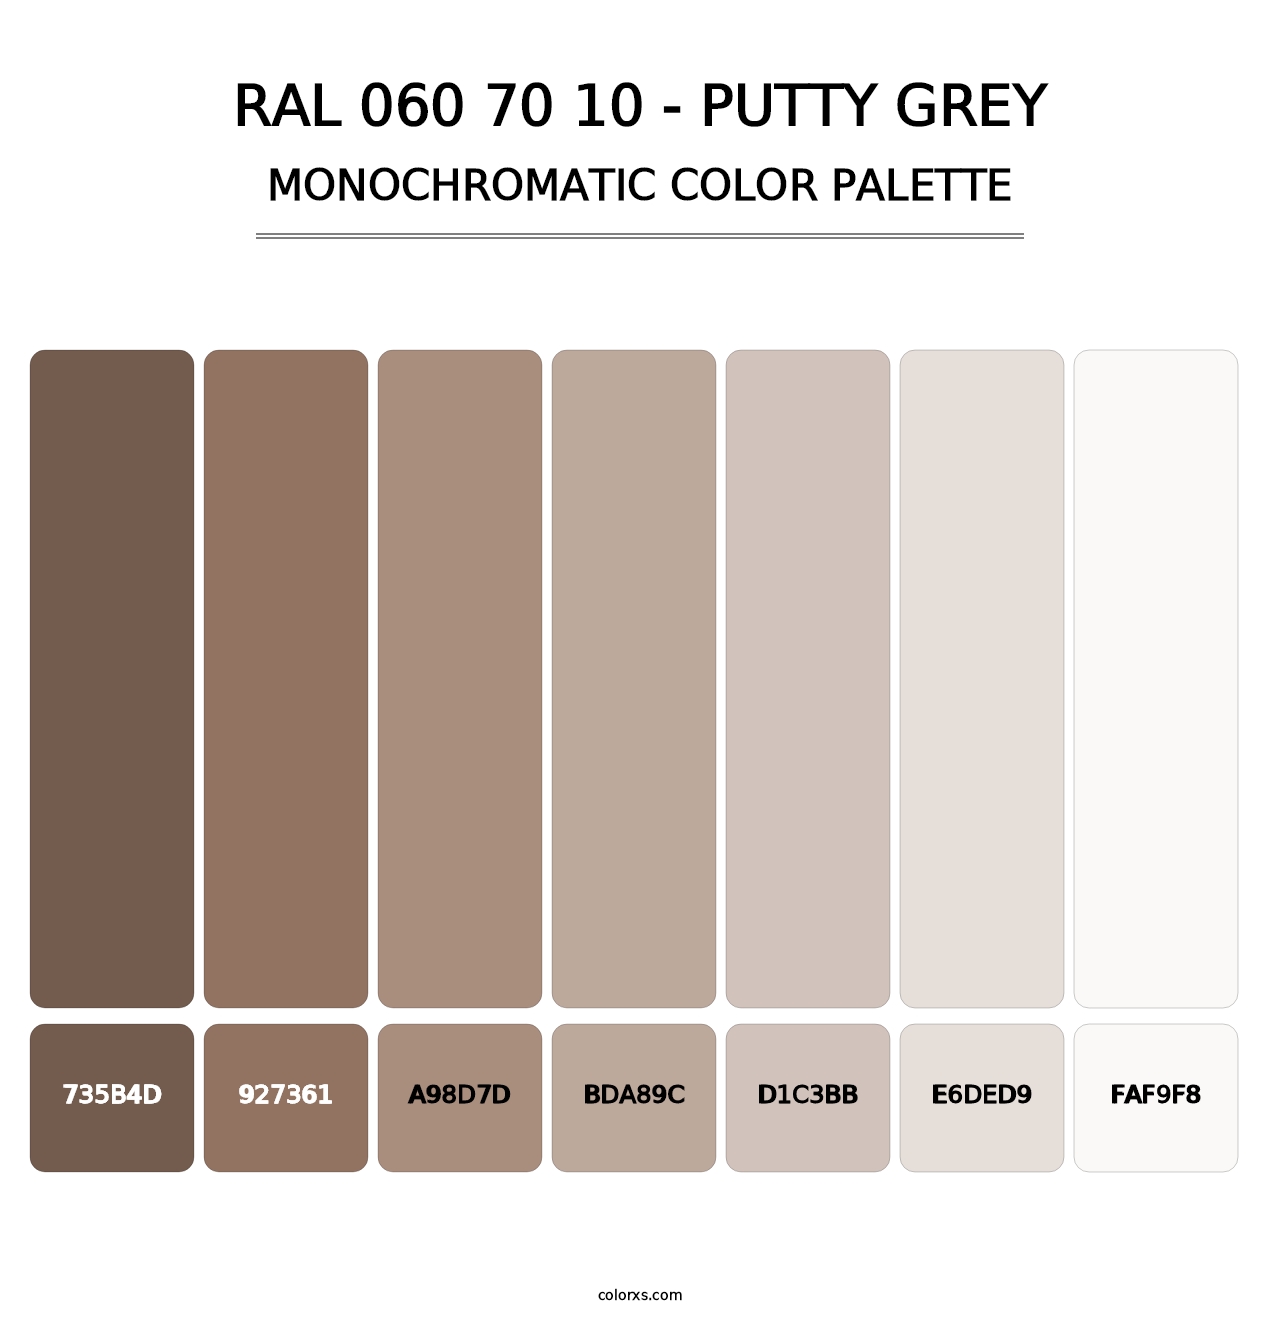 RAL 060 70 10 - Putty Grey - Monochromatic Color Palette